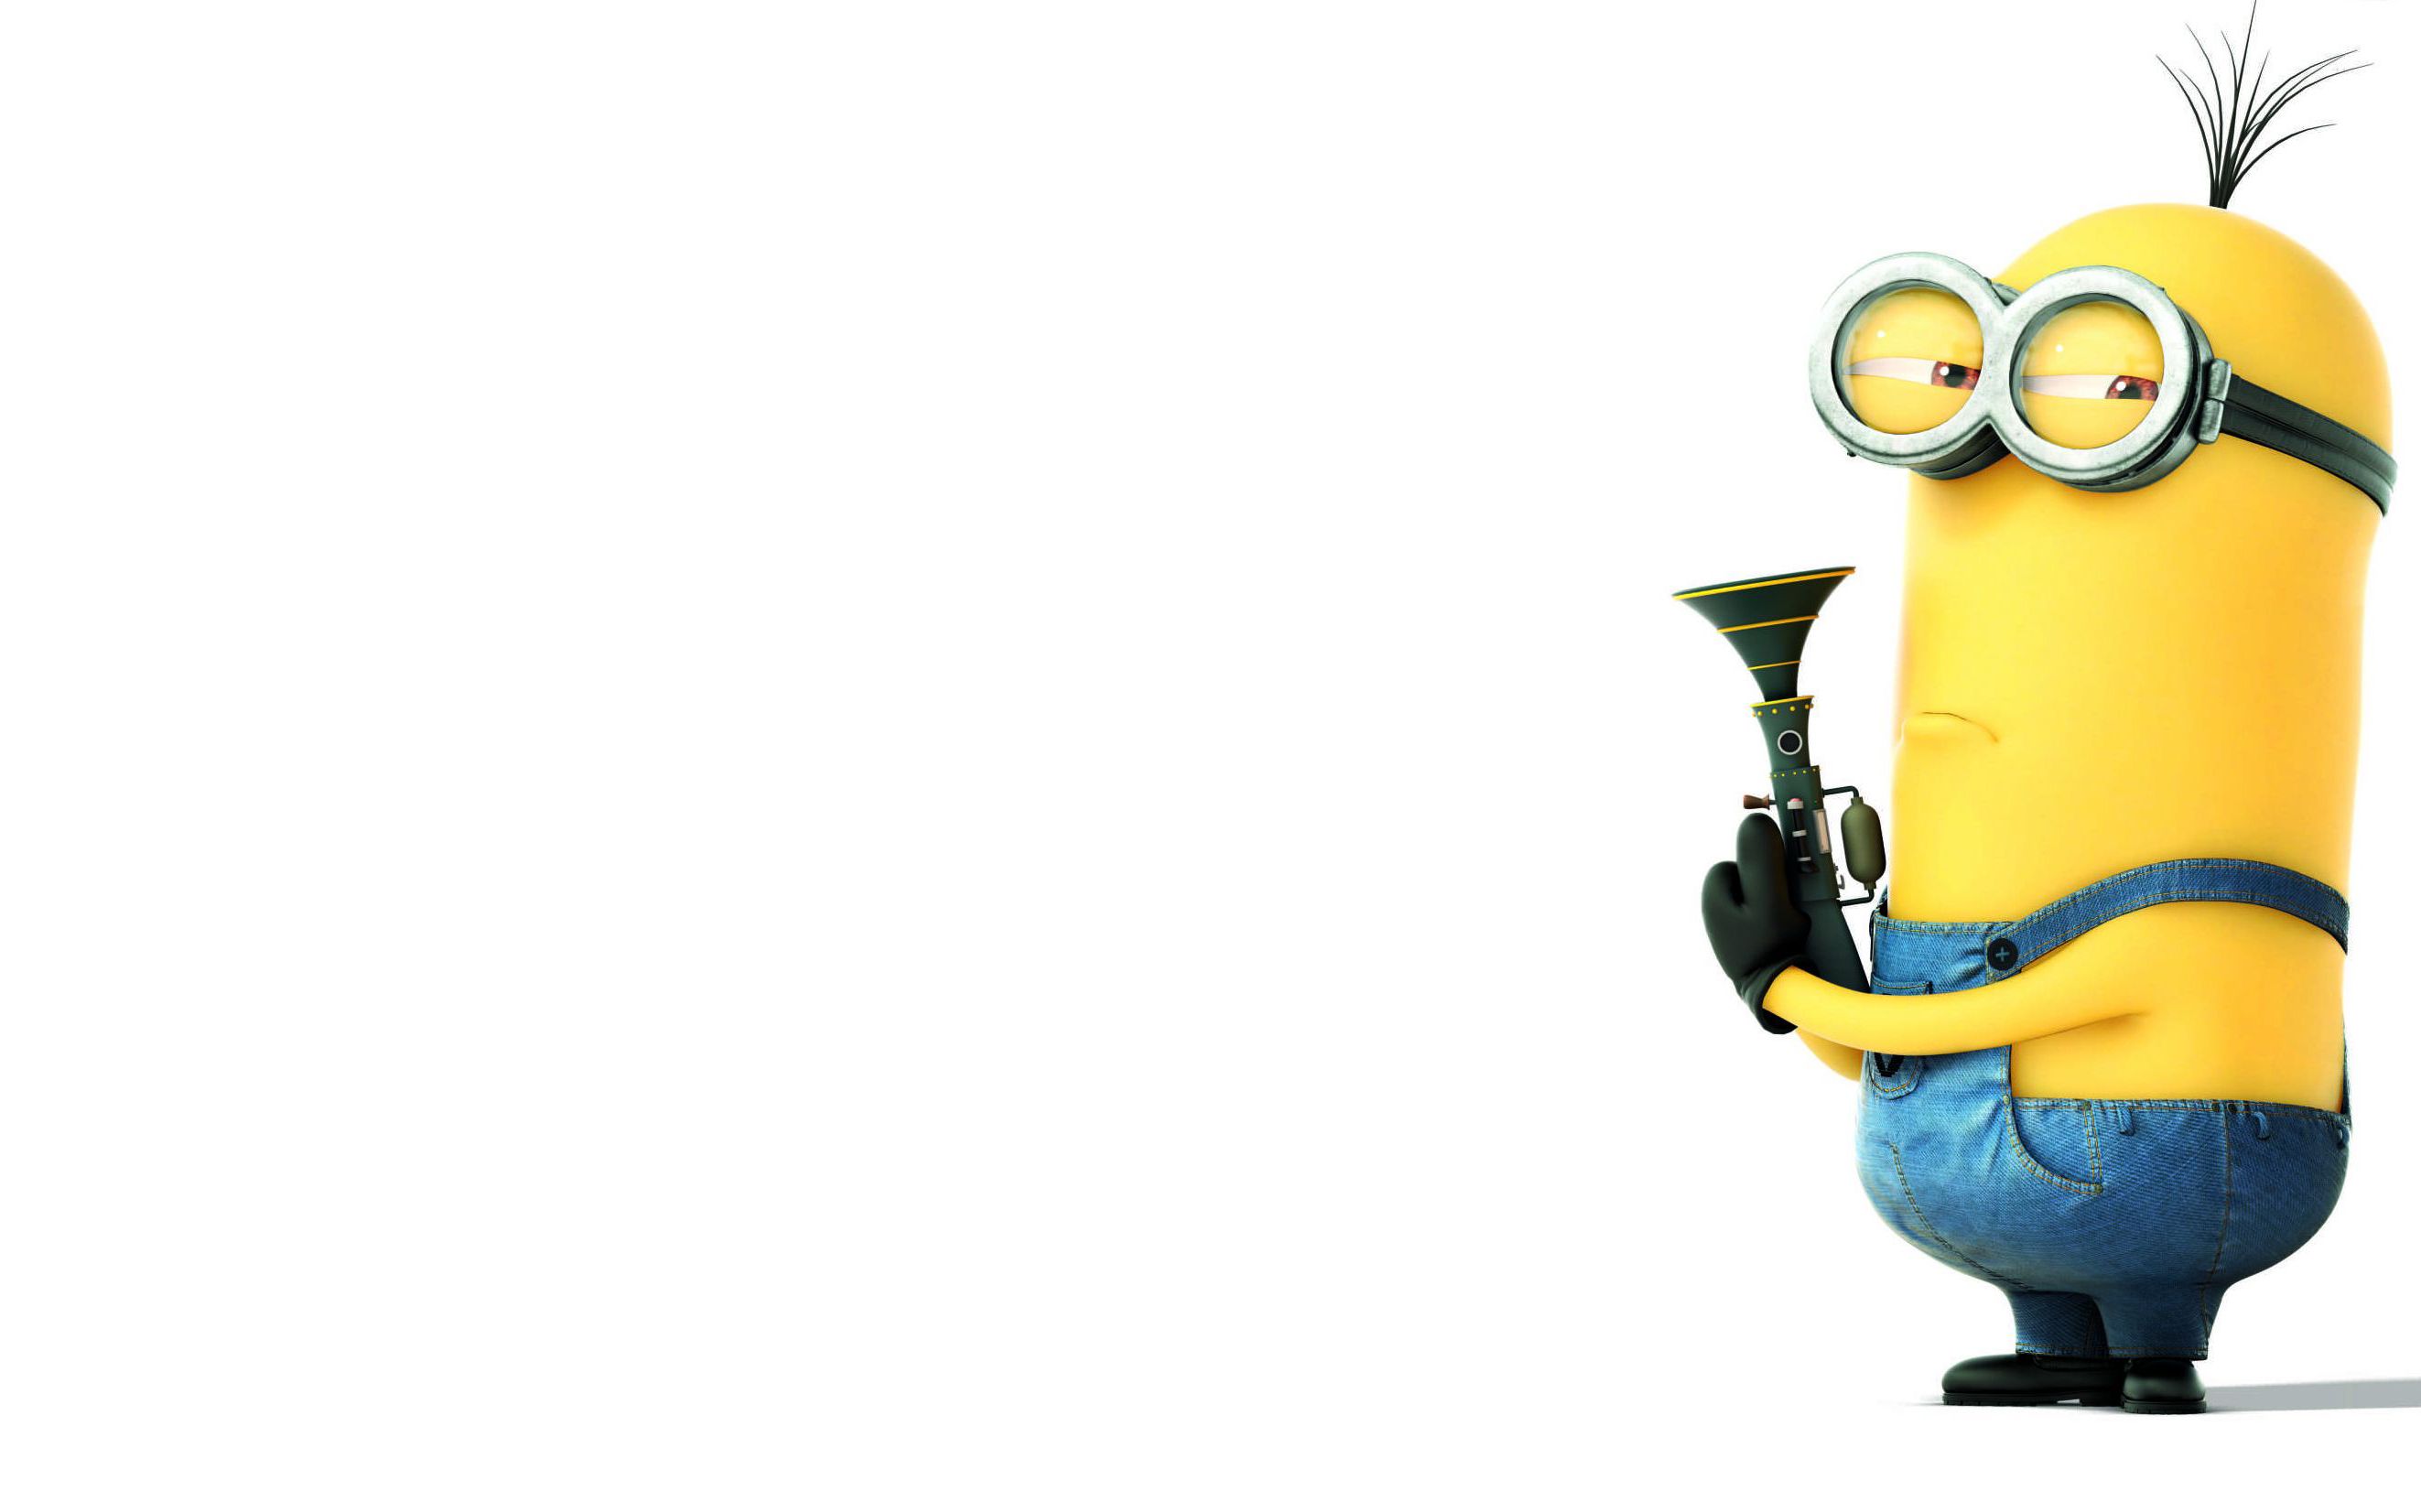 Despicable-Me-2-Minions-Cute-Wallpapers1.jpg